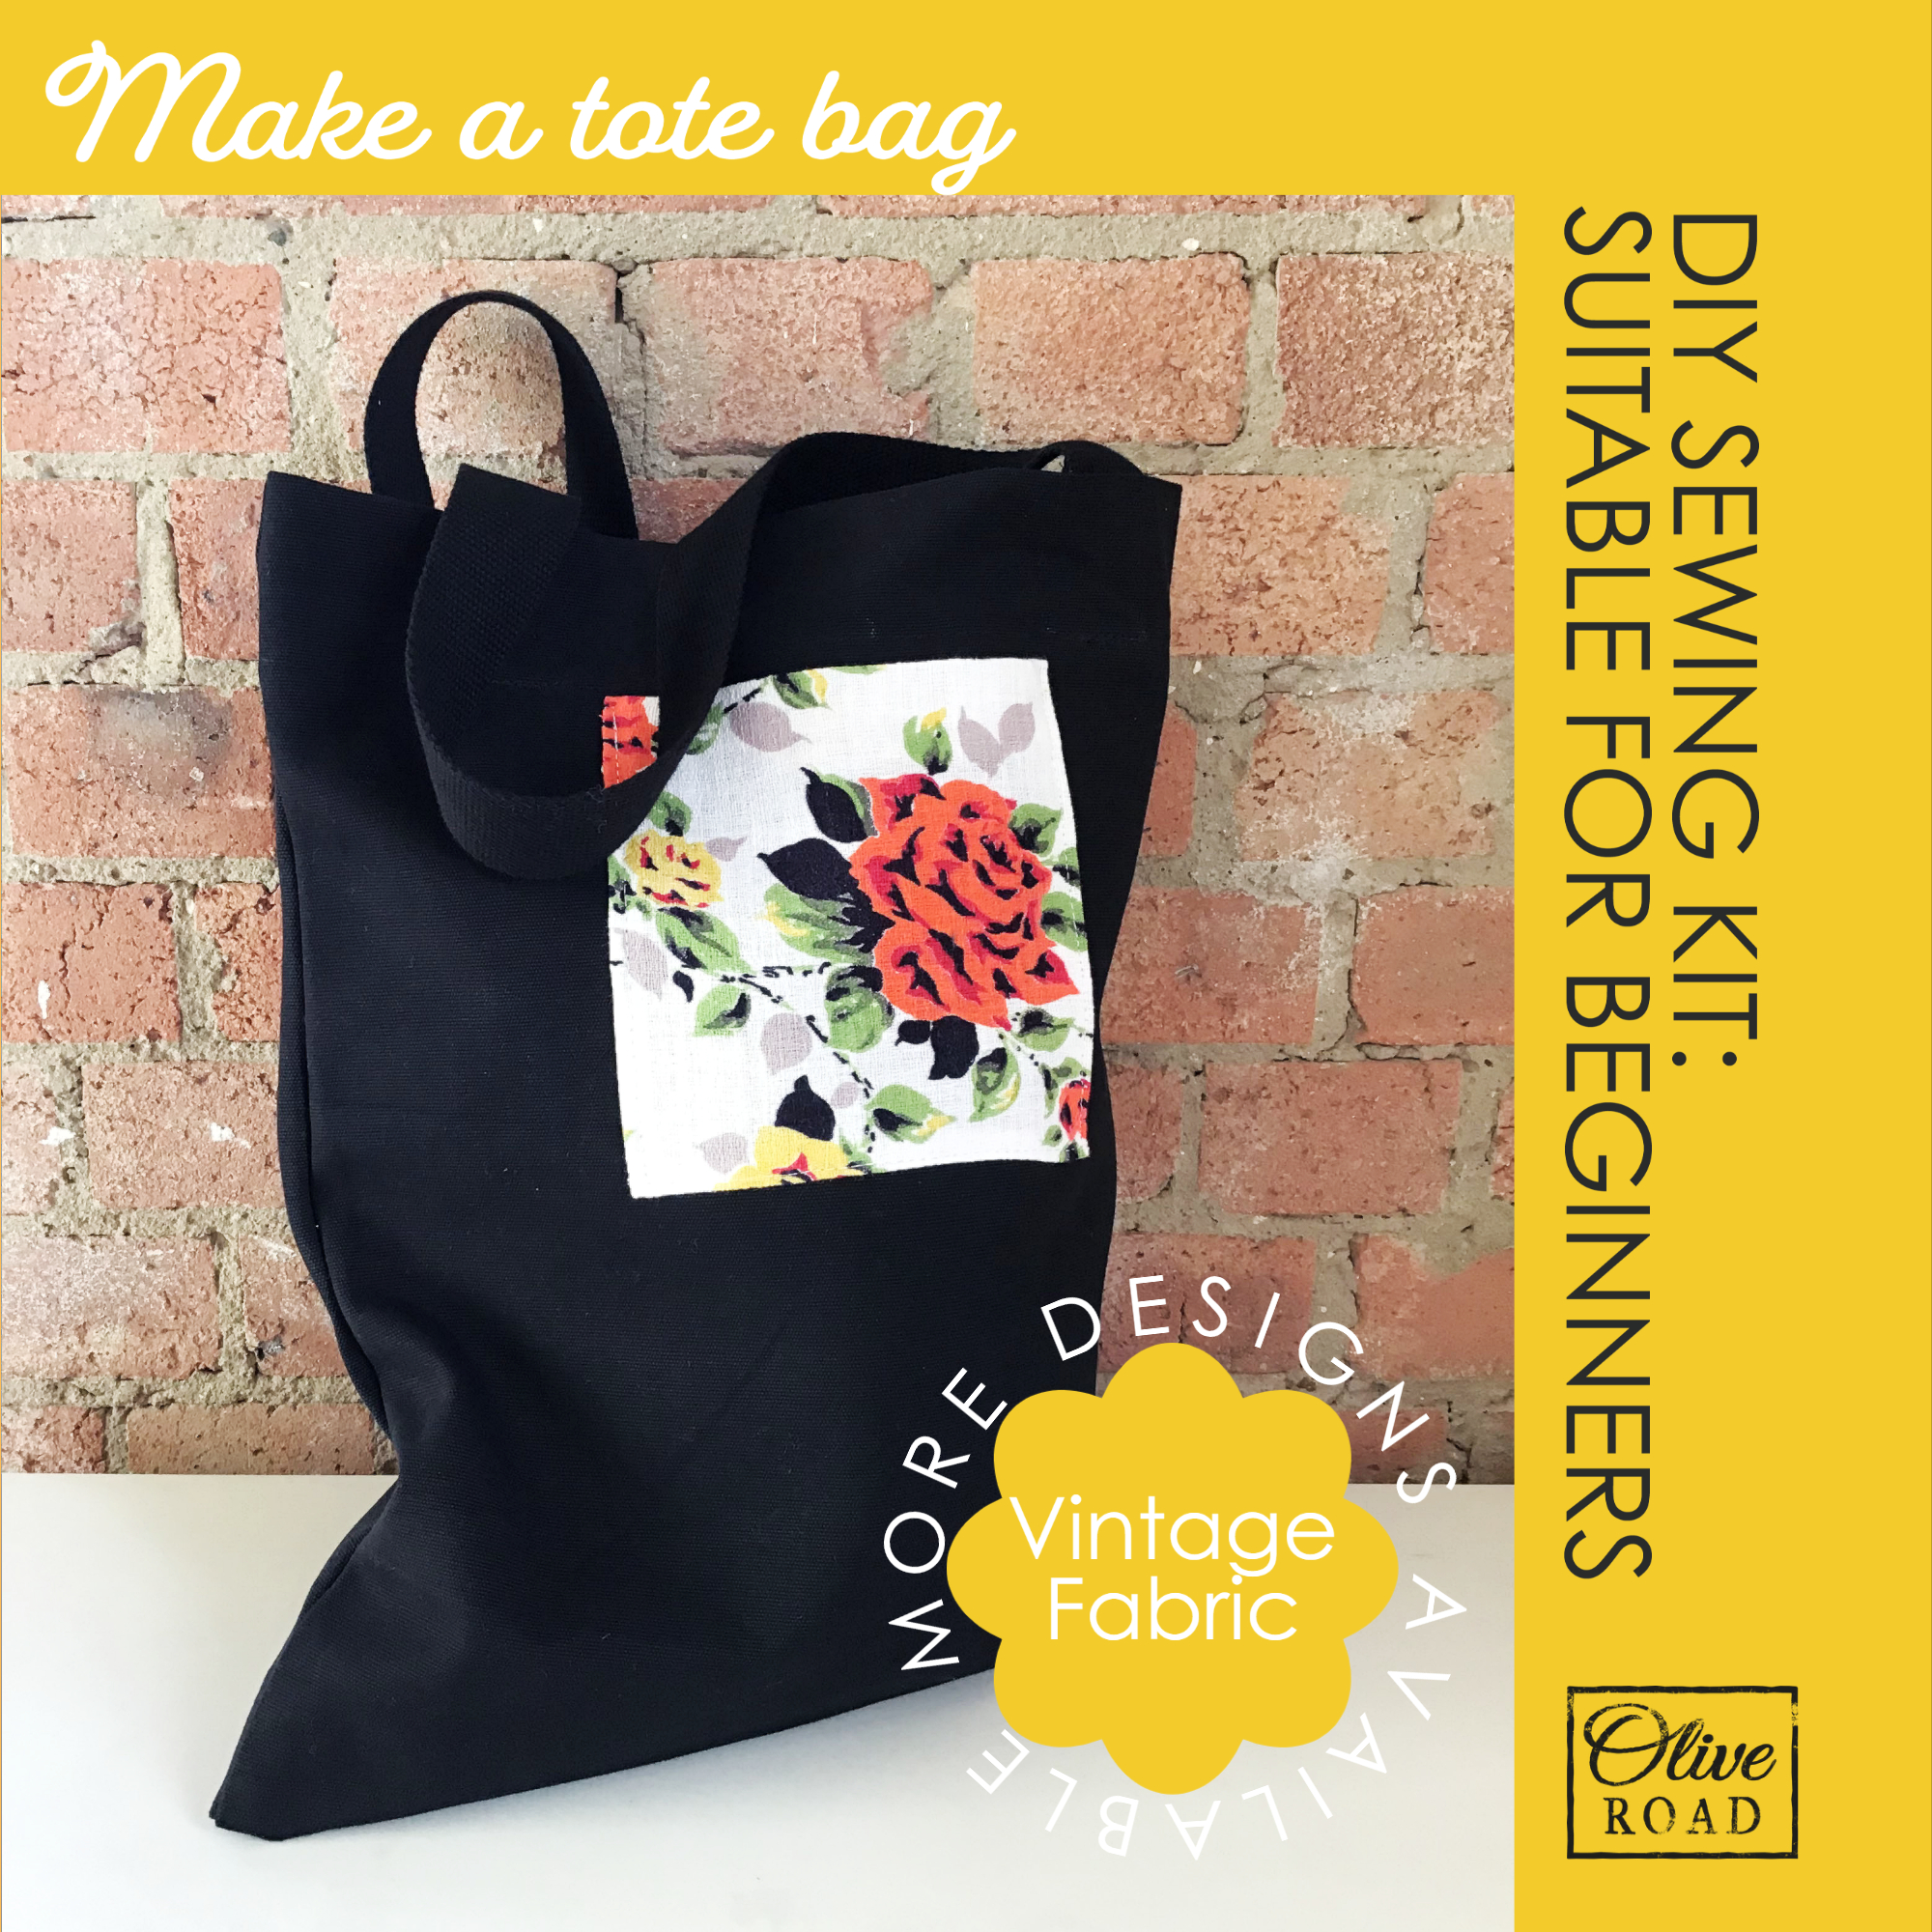 The sustainable tote bag kit: now available for sale - Time to Sew